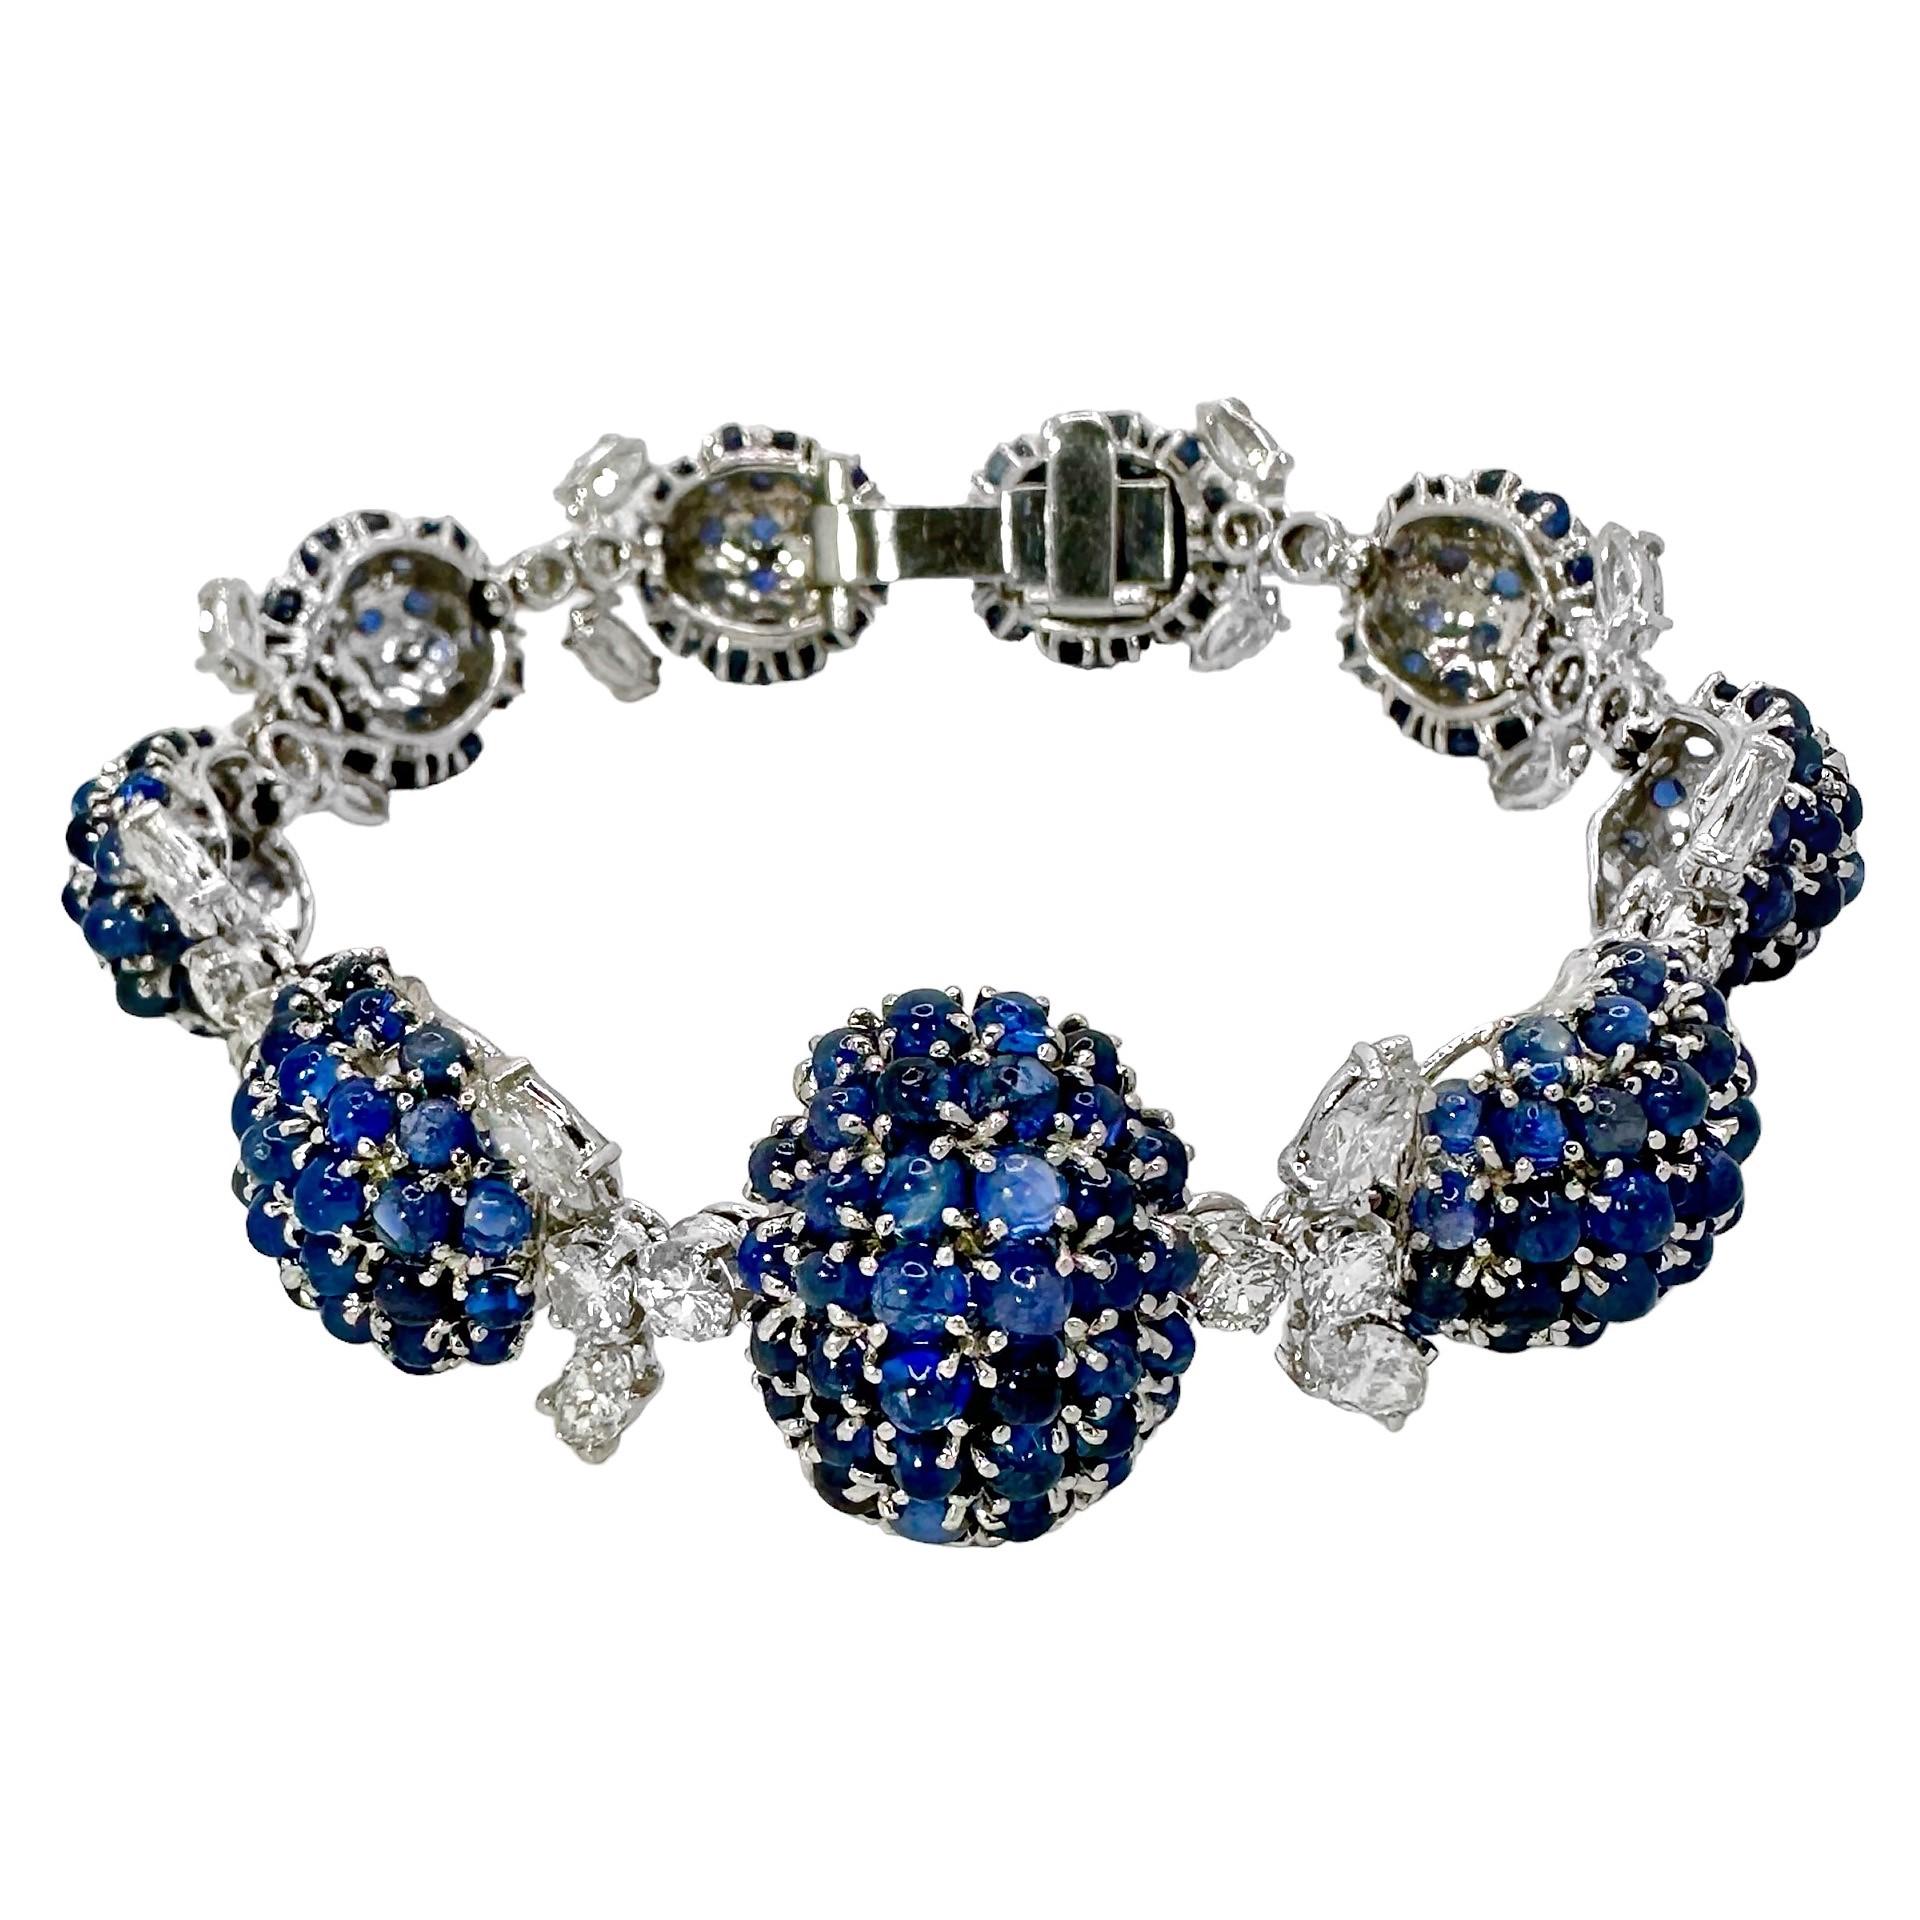 This graceful Mid-20th Century creation is a fine example of the Retro genre and is expertly set with lovely natural blue sapphire cabochons and brilliant cut and marquise diamonds. The bracelet consists of a single line of nine high dome sections,